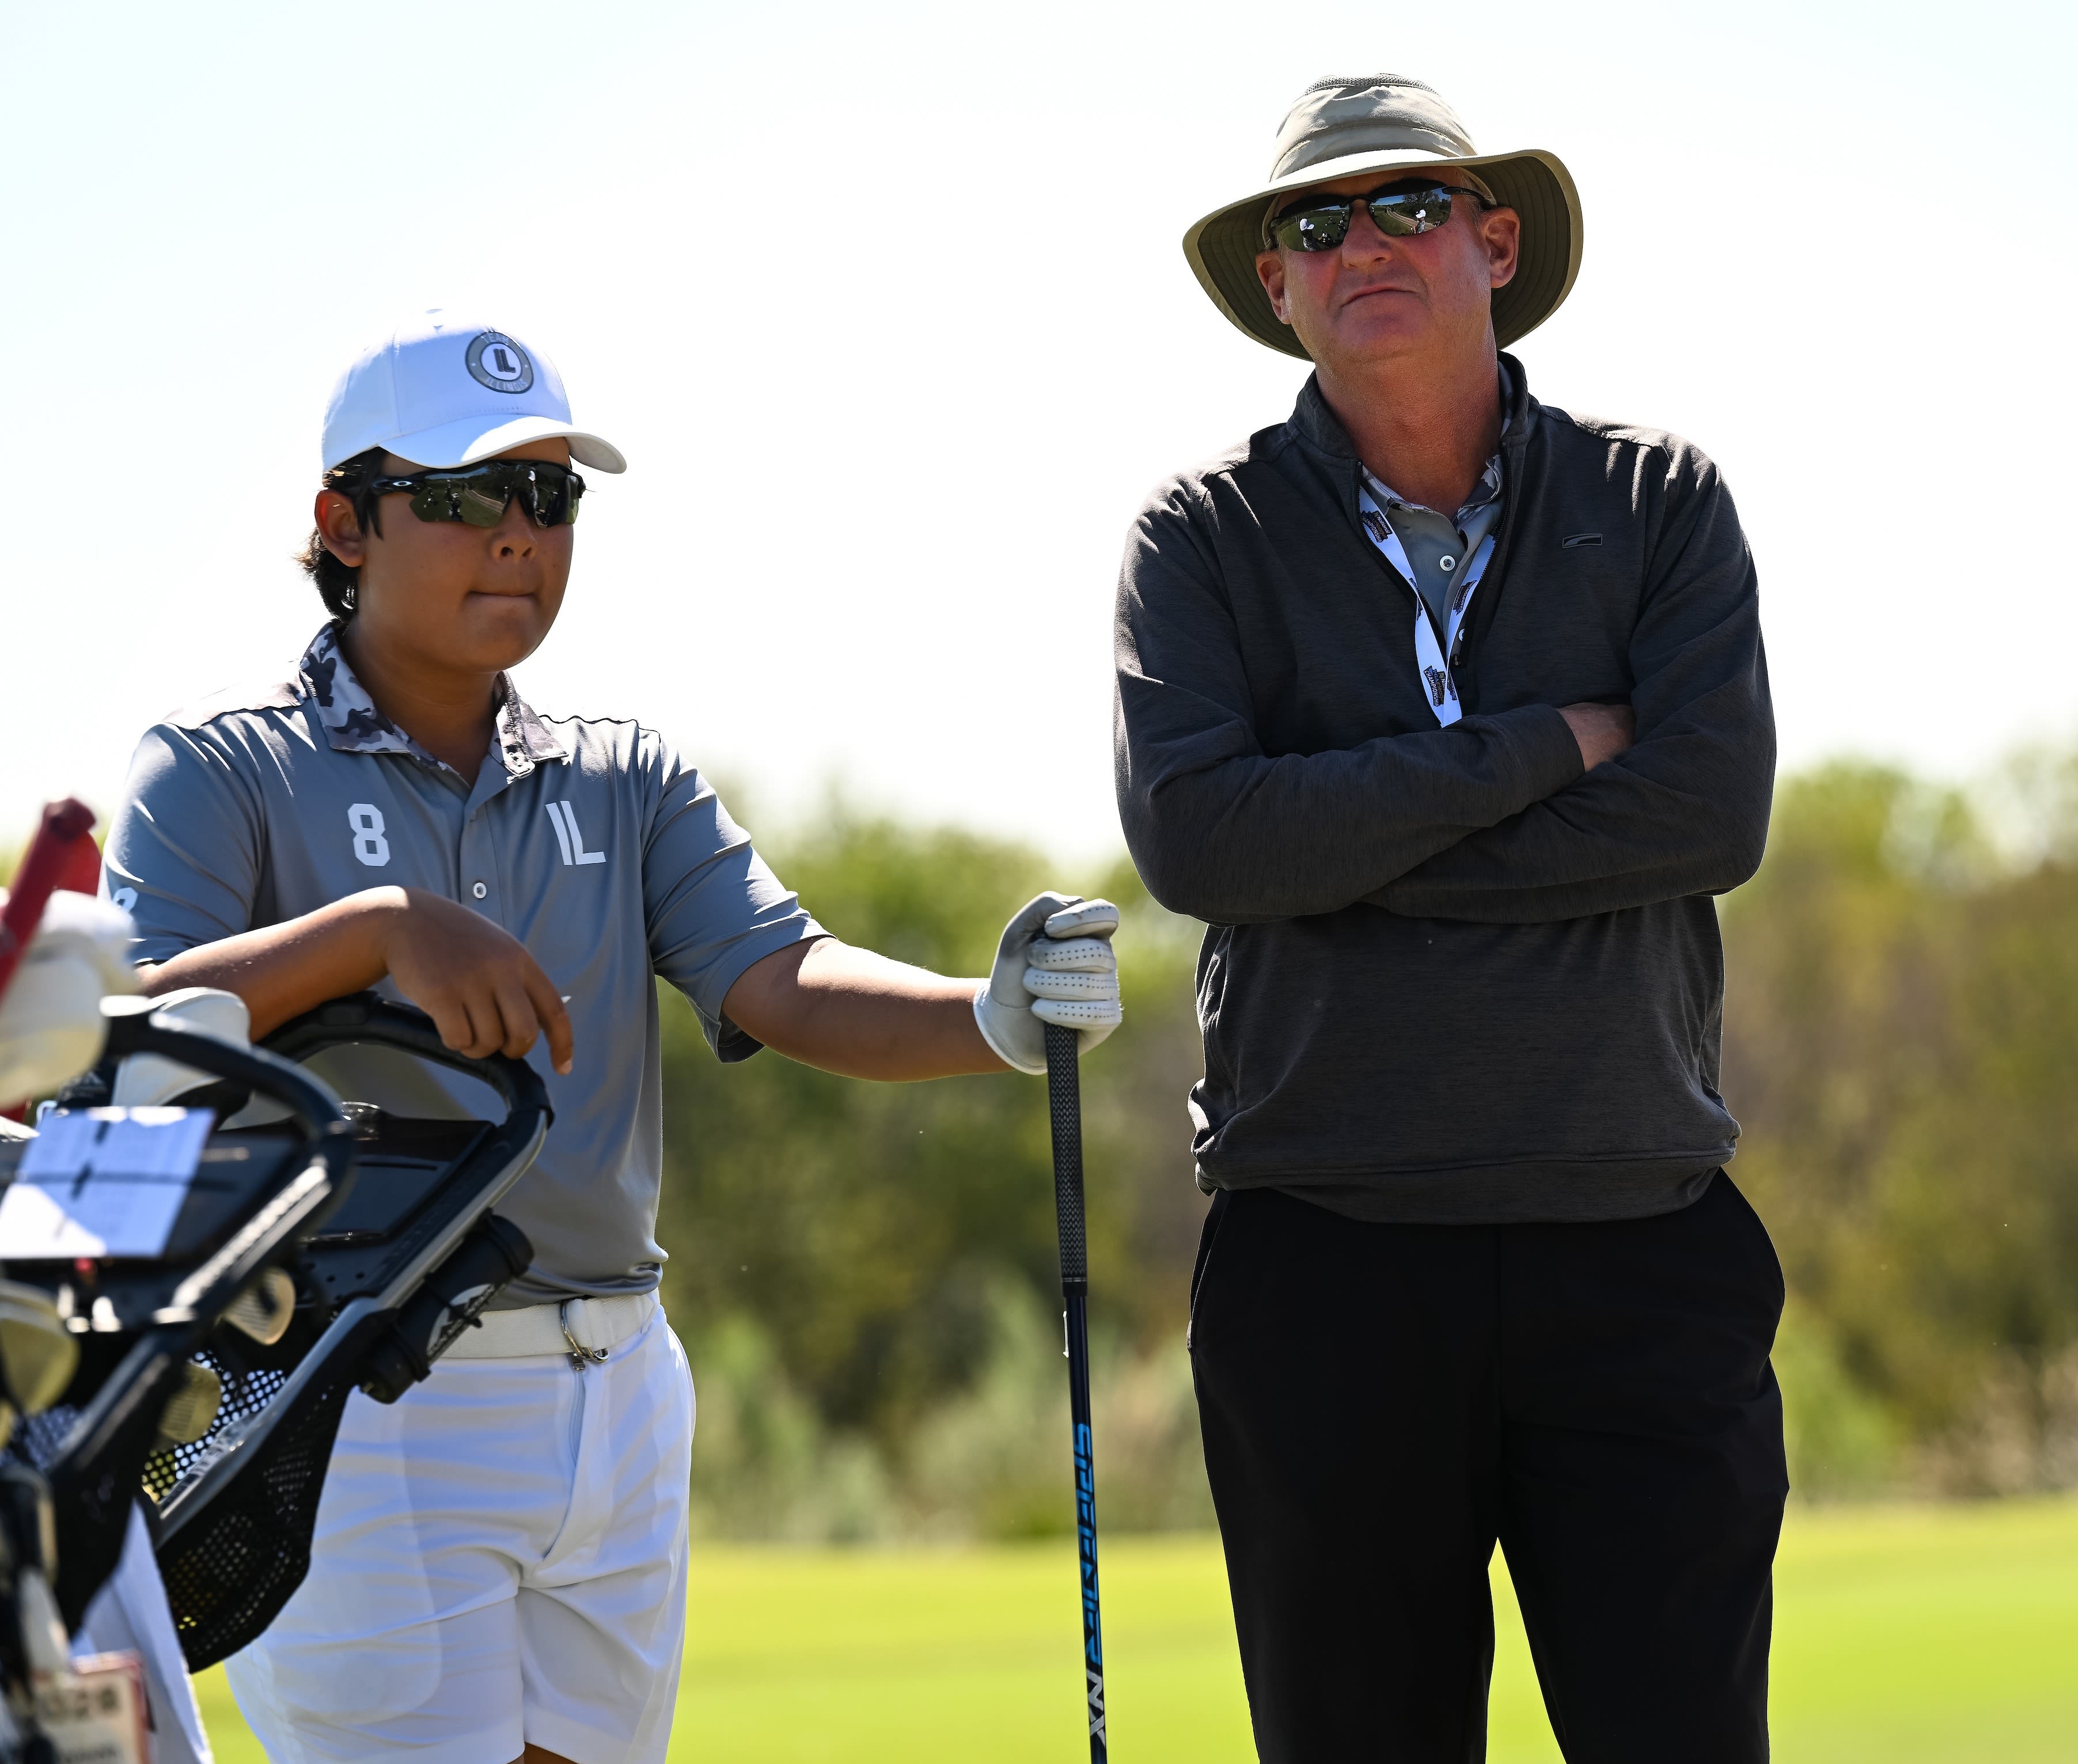 William Cui (left) and Kevin Weeks. (Ryan Lochhead)